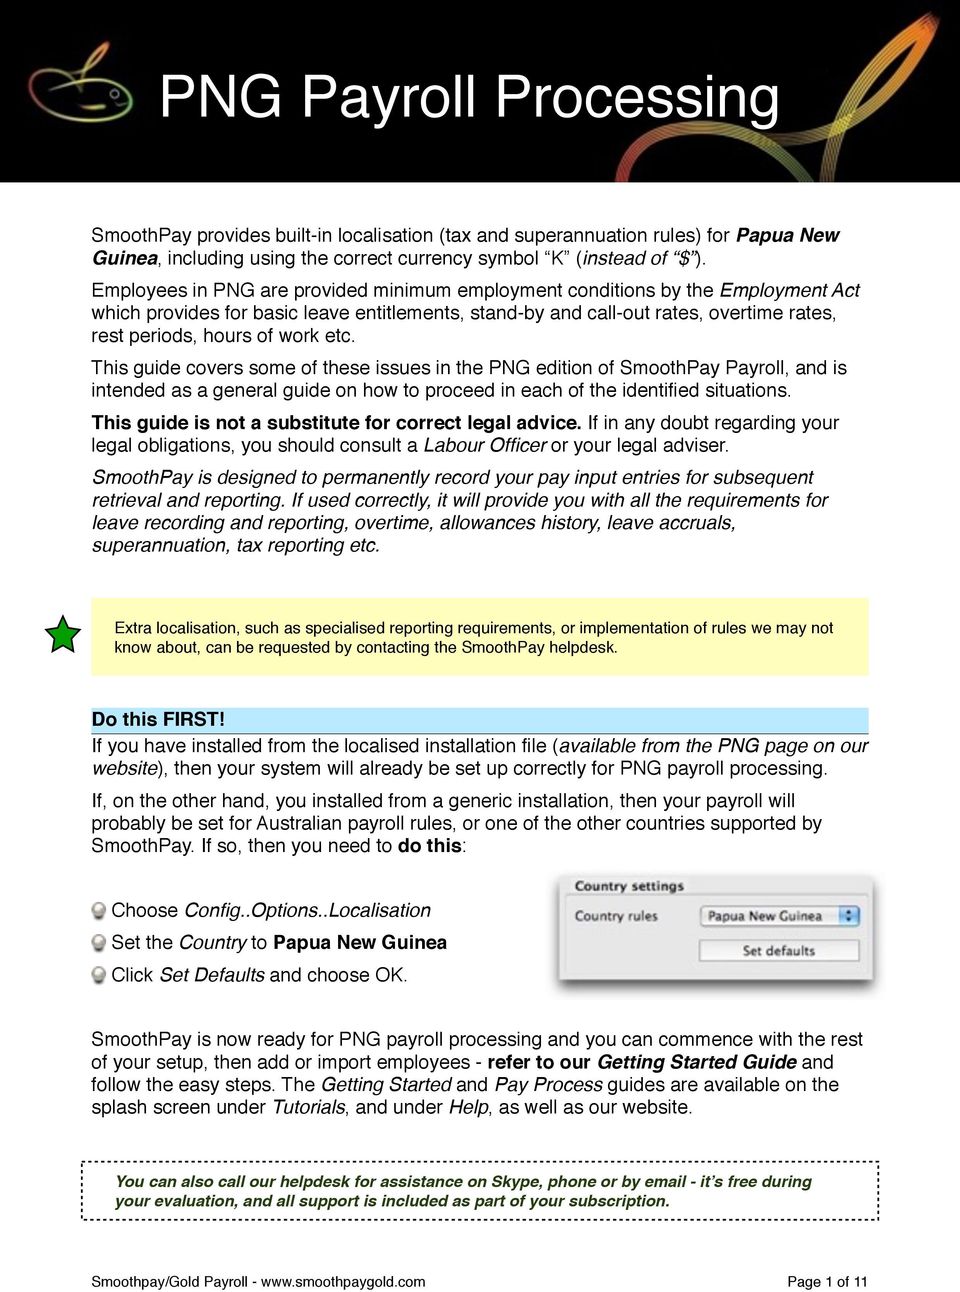 etc. This guide covers some of these issues in the PNG edition of SmoothPay Payroll, and is intended as a general guide on how to proceed in each of the identified situations.